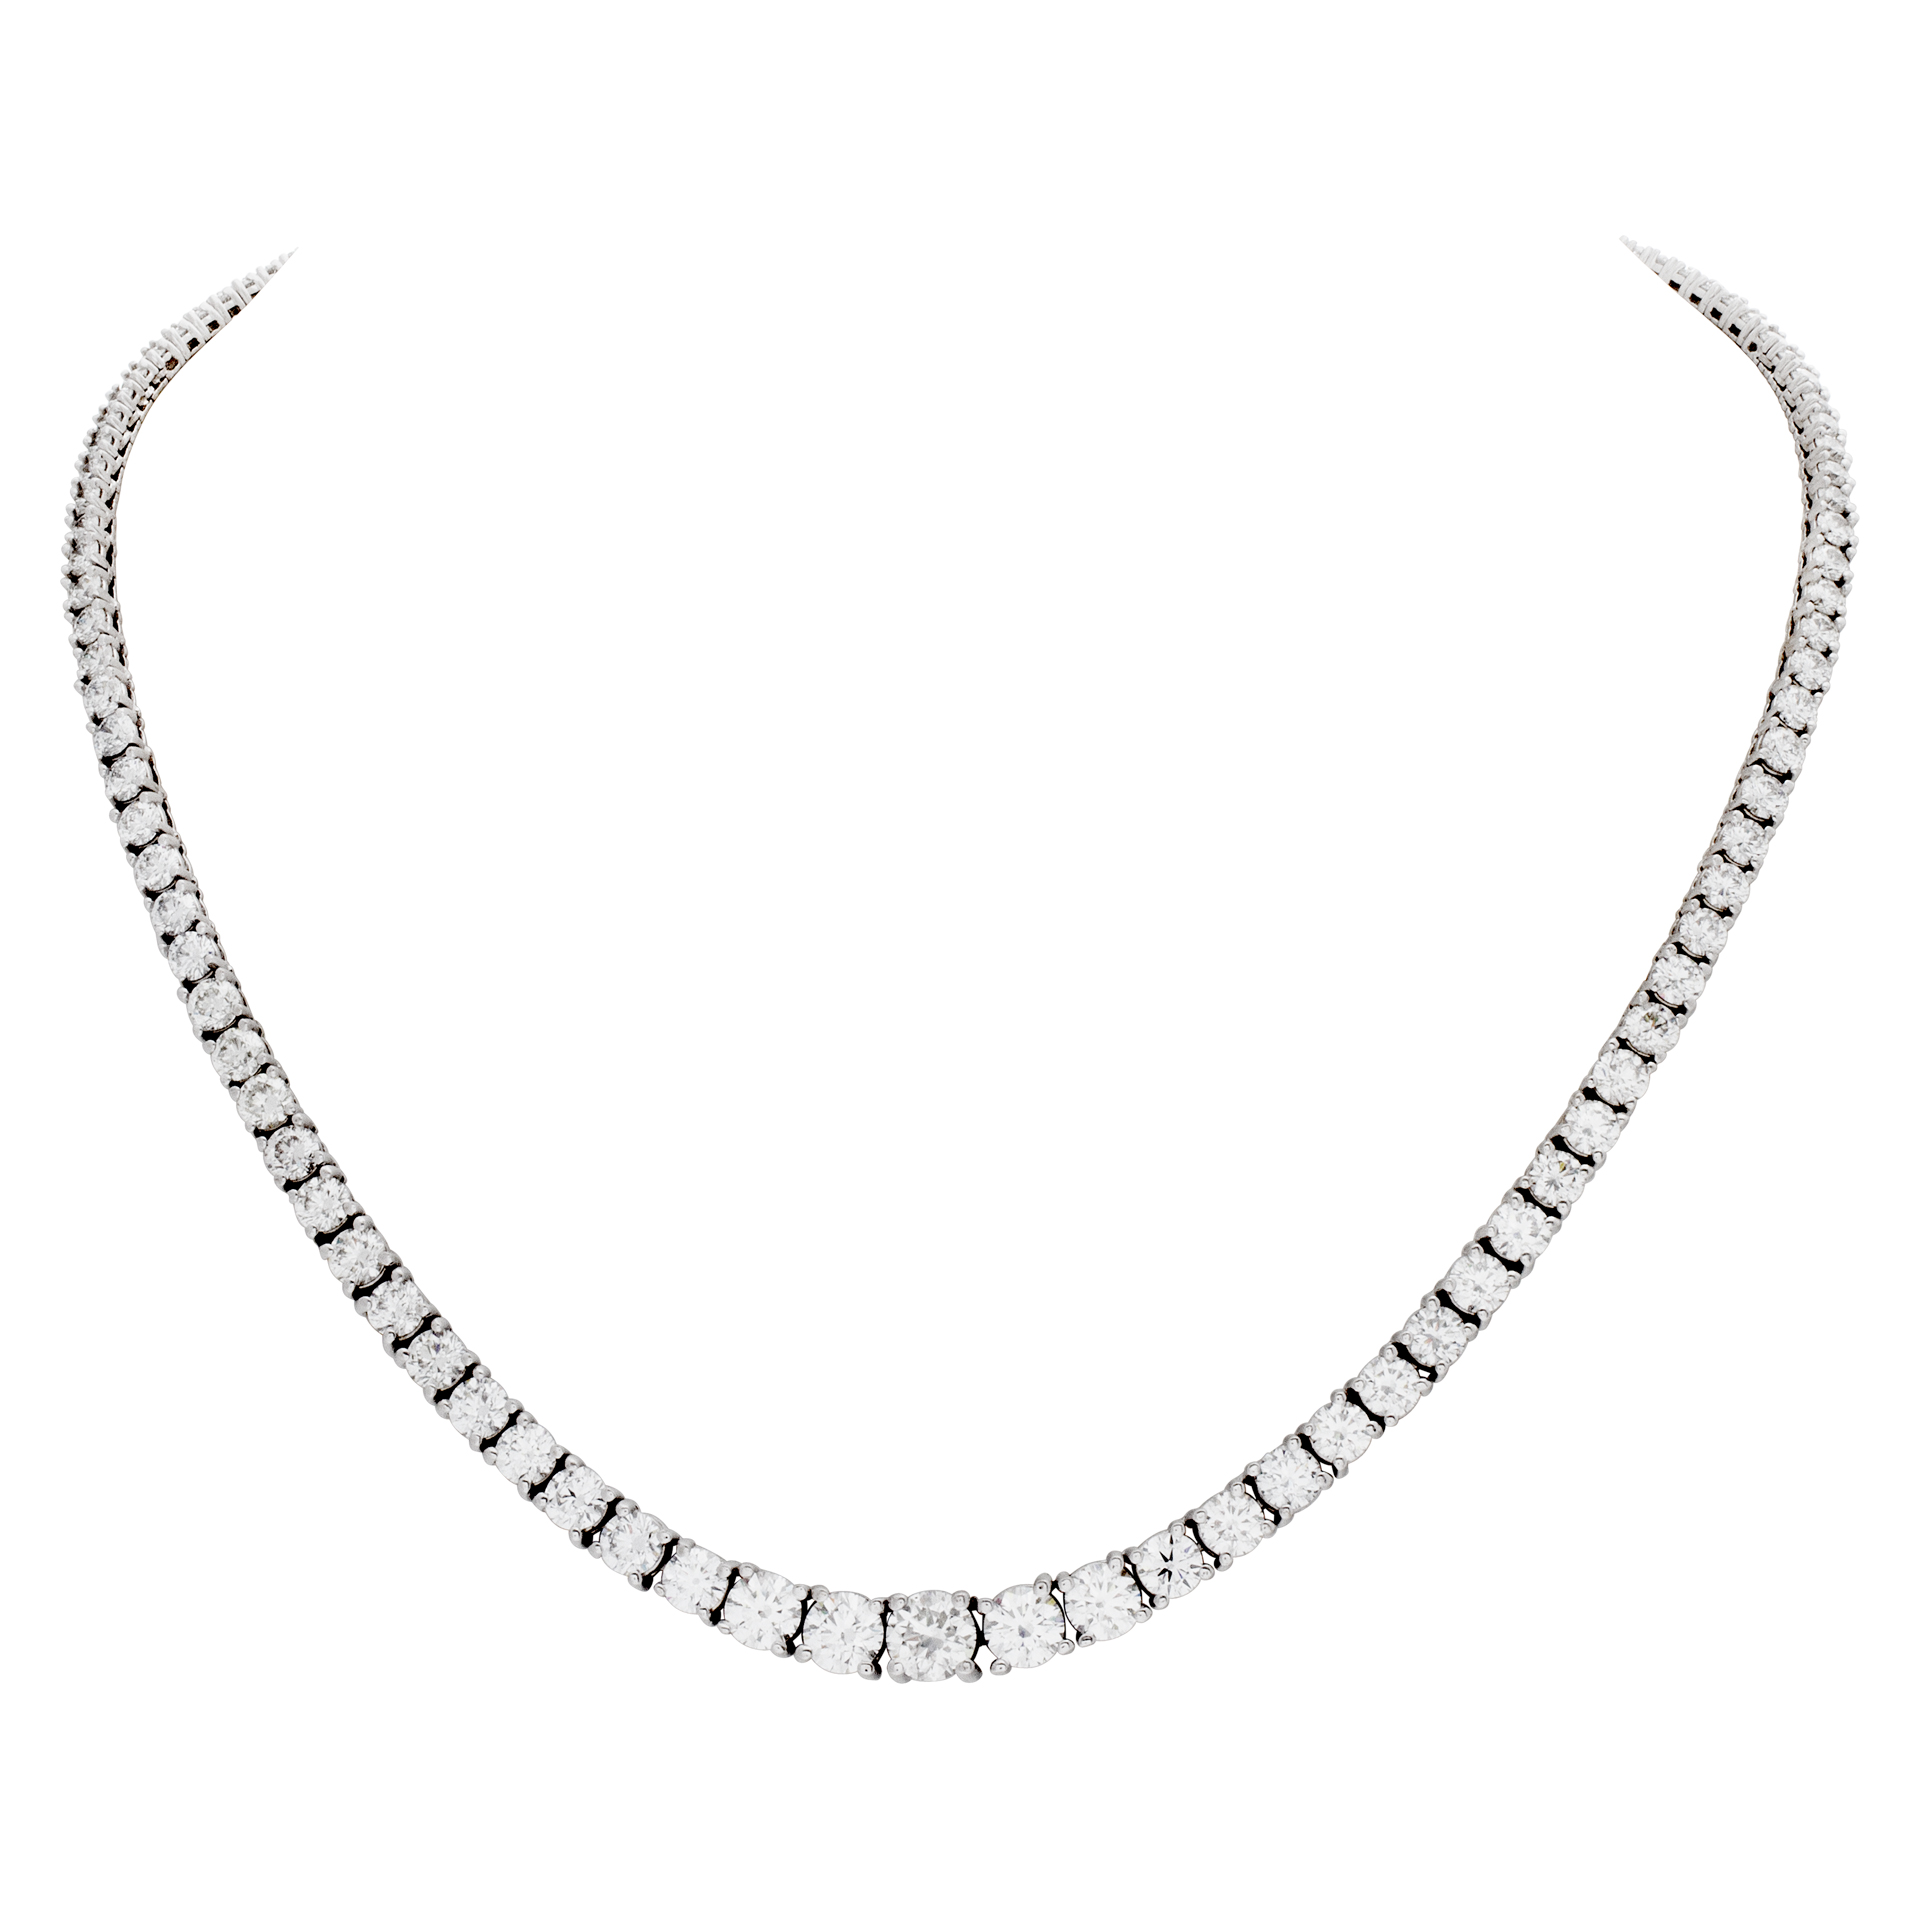 Diamond Riviera necklace with center GIA certified diamond (0.90 carat) and over 17.73 carats full cut round brilliant diamonds, in 18k White gold (Stones)